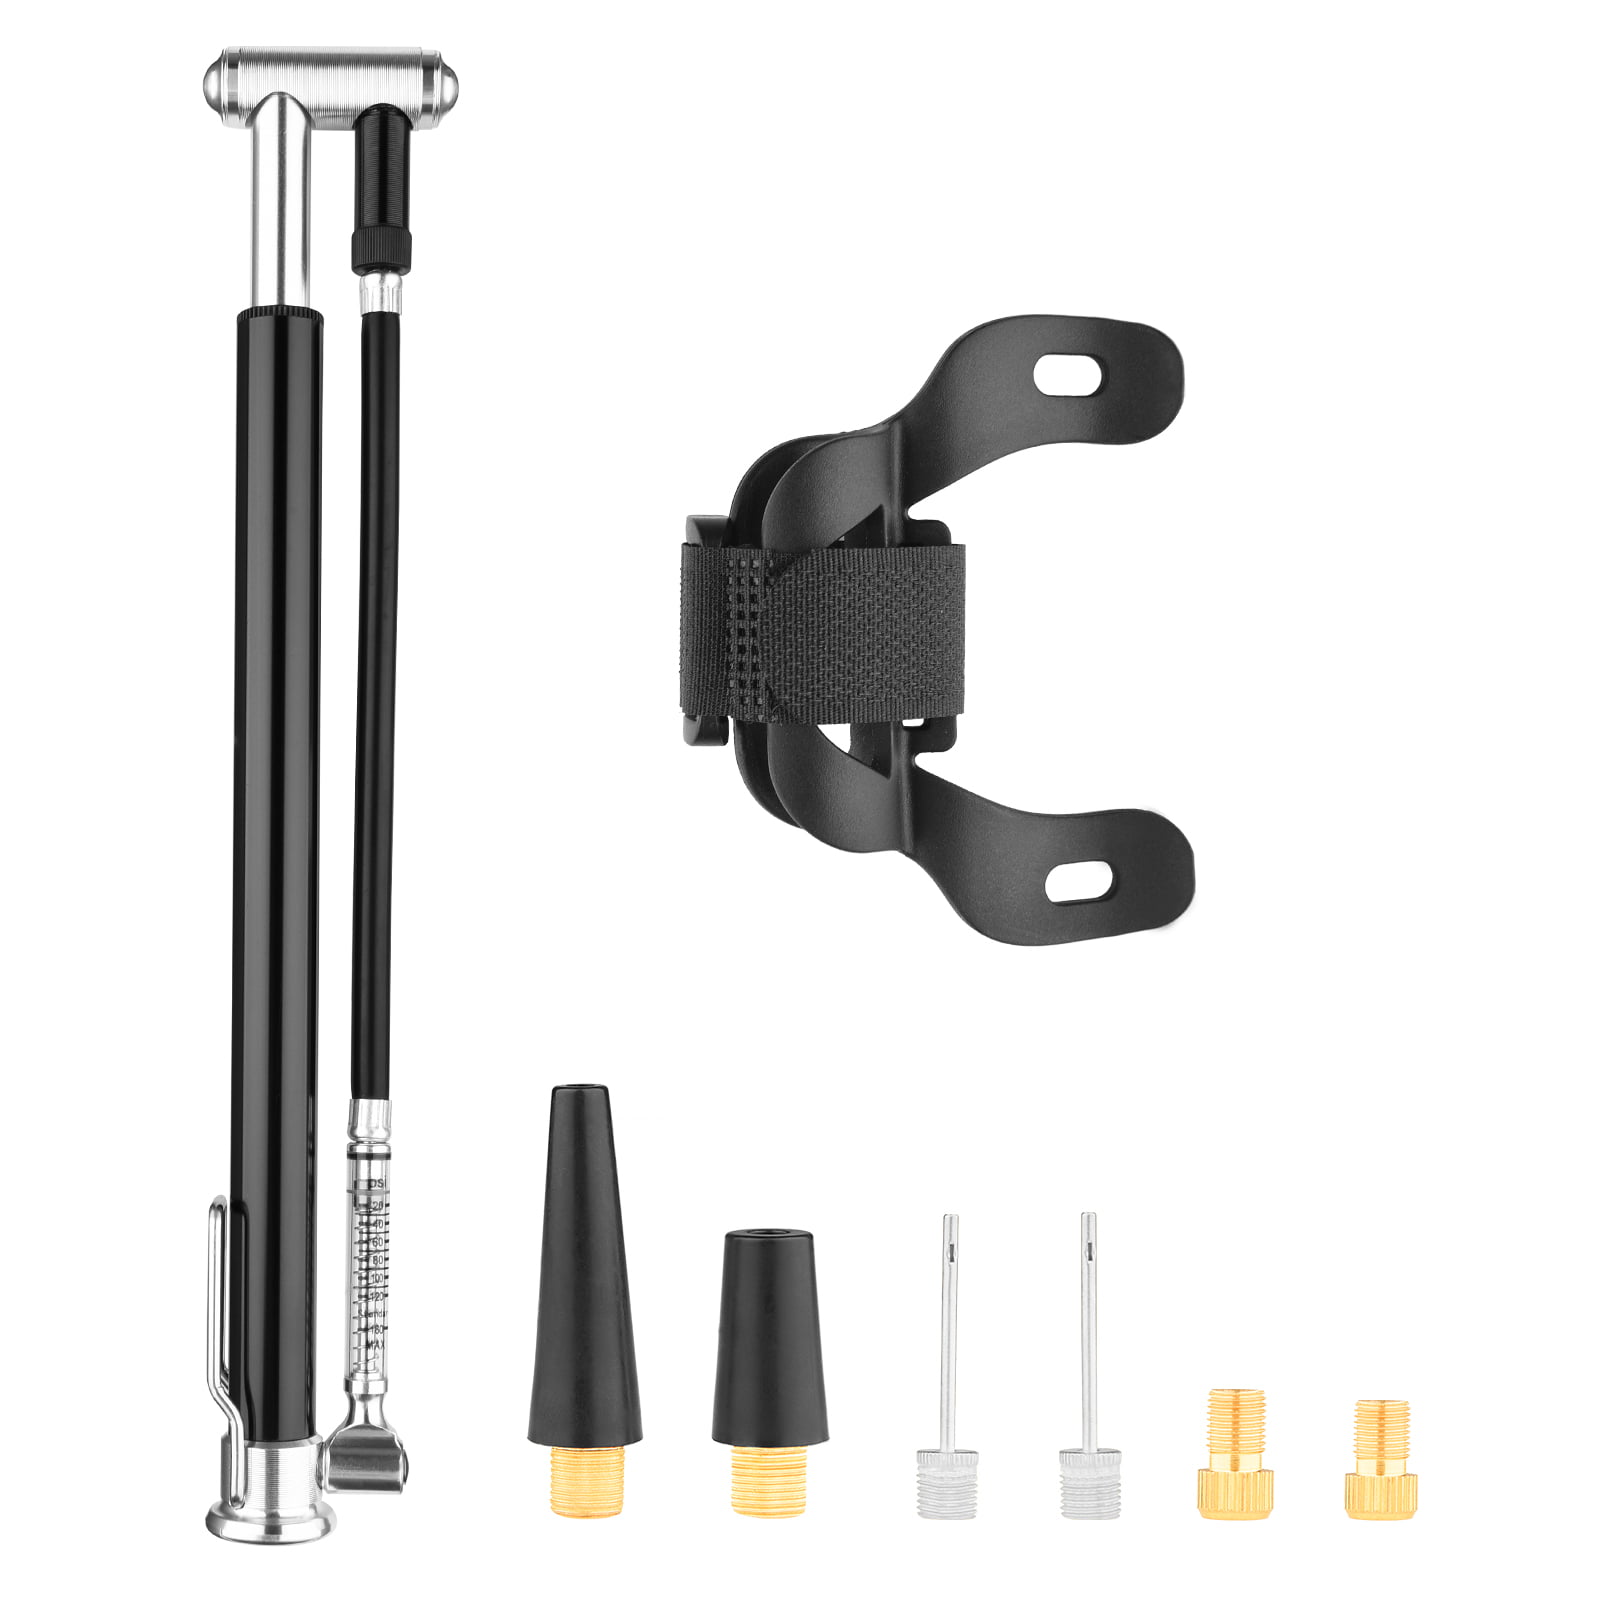 120 PSI Ultra Lightweight Mini Handheld Bycycle Ball Pump with Needle air nozzle Mountain & BMX Bike Presta & Schrader valves and Frame Mount for Road Gifort Bike Pump